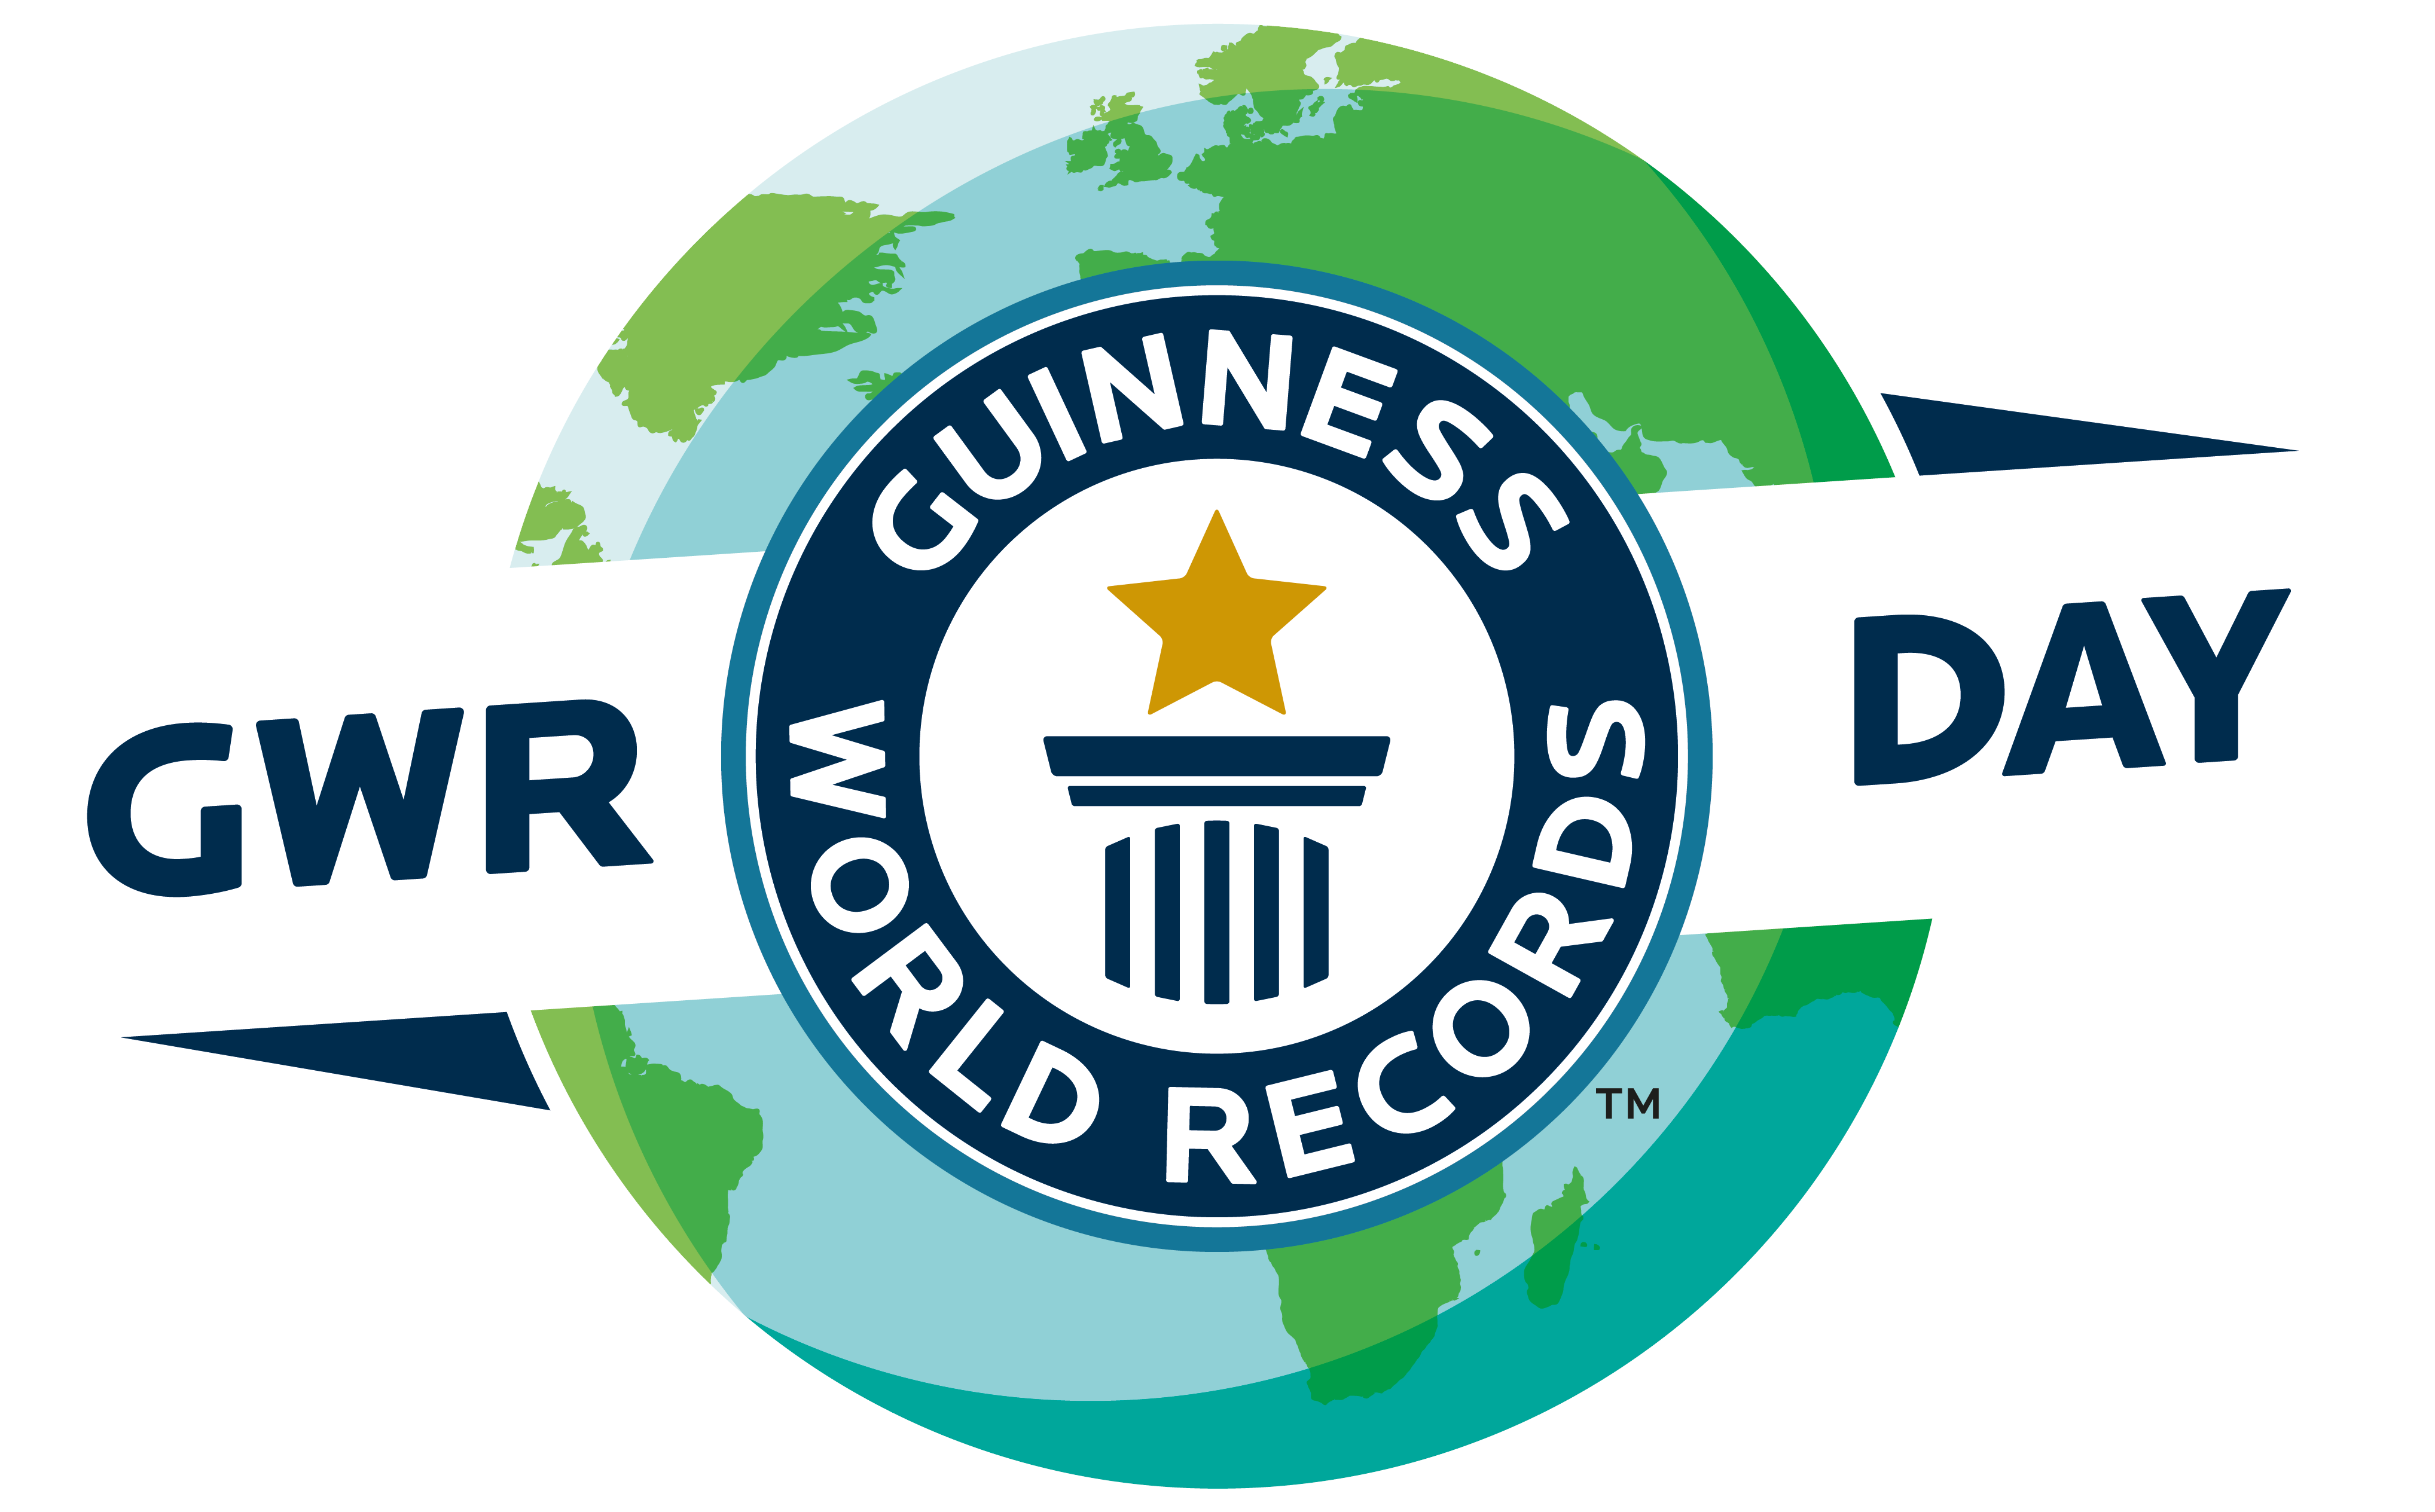 Enter The Guinness World Records Day Contest Guinness World Records Clipart Large Size Png Image Pikpng